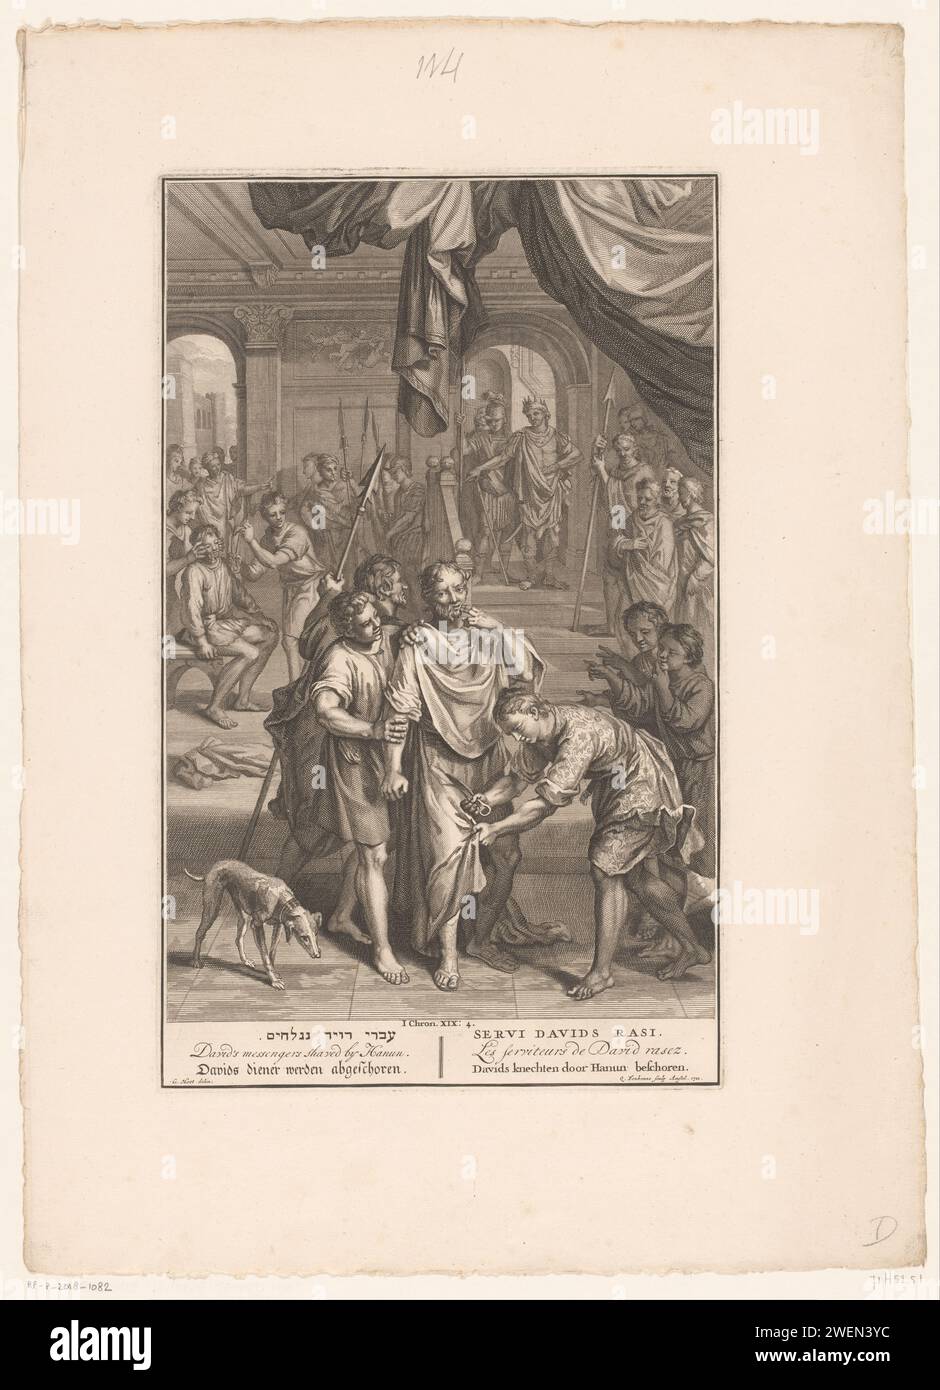 Davids servants at Hanun, Quiryn Fonbonne, After Gerard Hoet (I), 1720 - 1728 print   paper etching / engraving Hanun, king of the Ammonites, mistreats David's messengers: their beards are shaven off and their clothes are cut off Stock Photo